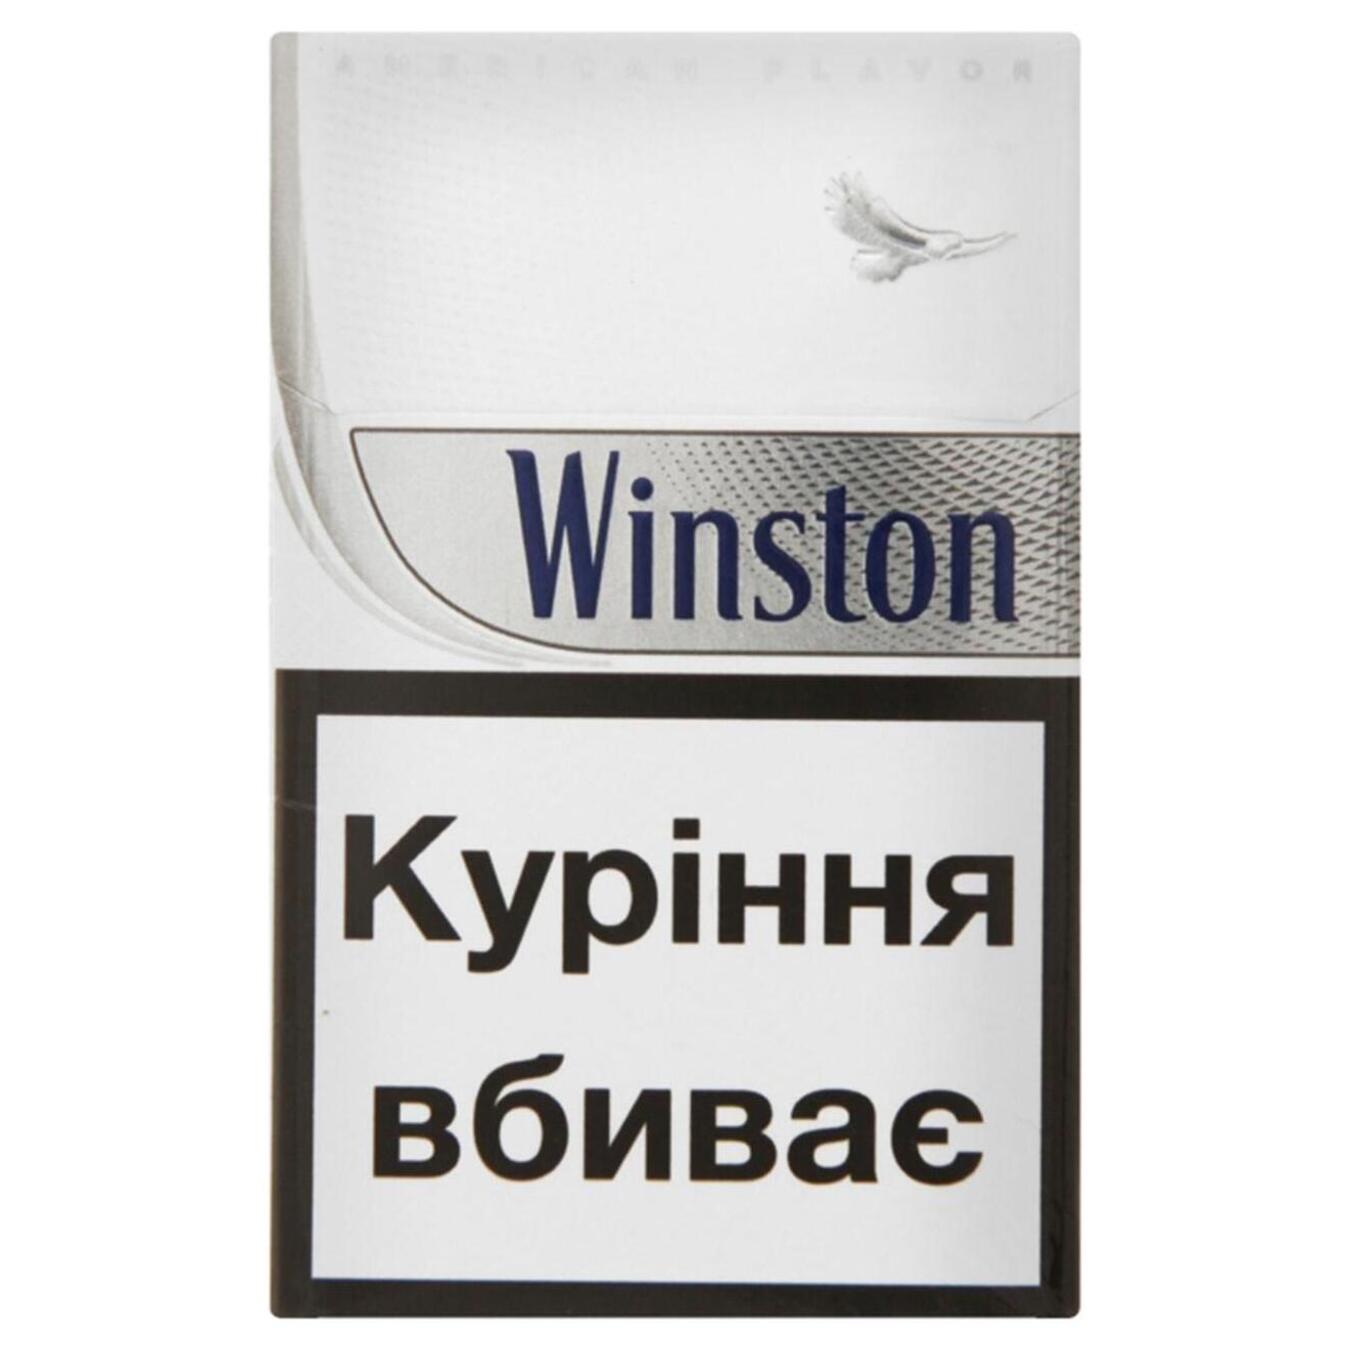 Cigarettes Winston Silver (the price is indicated without excise tax)